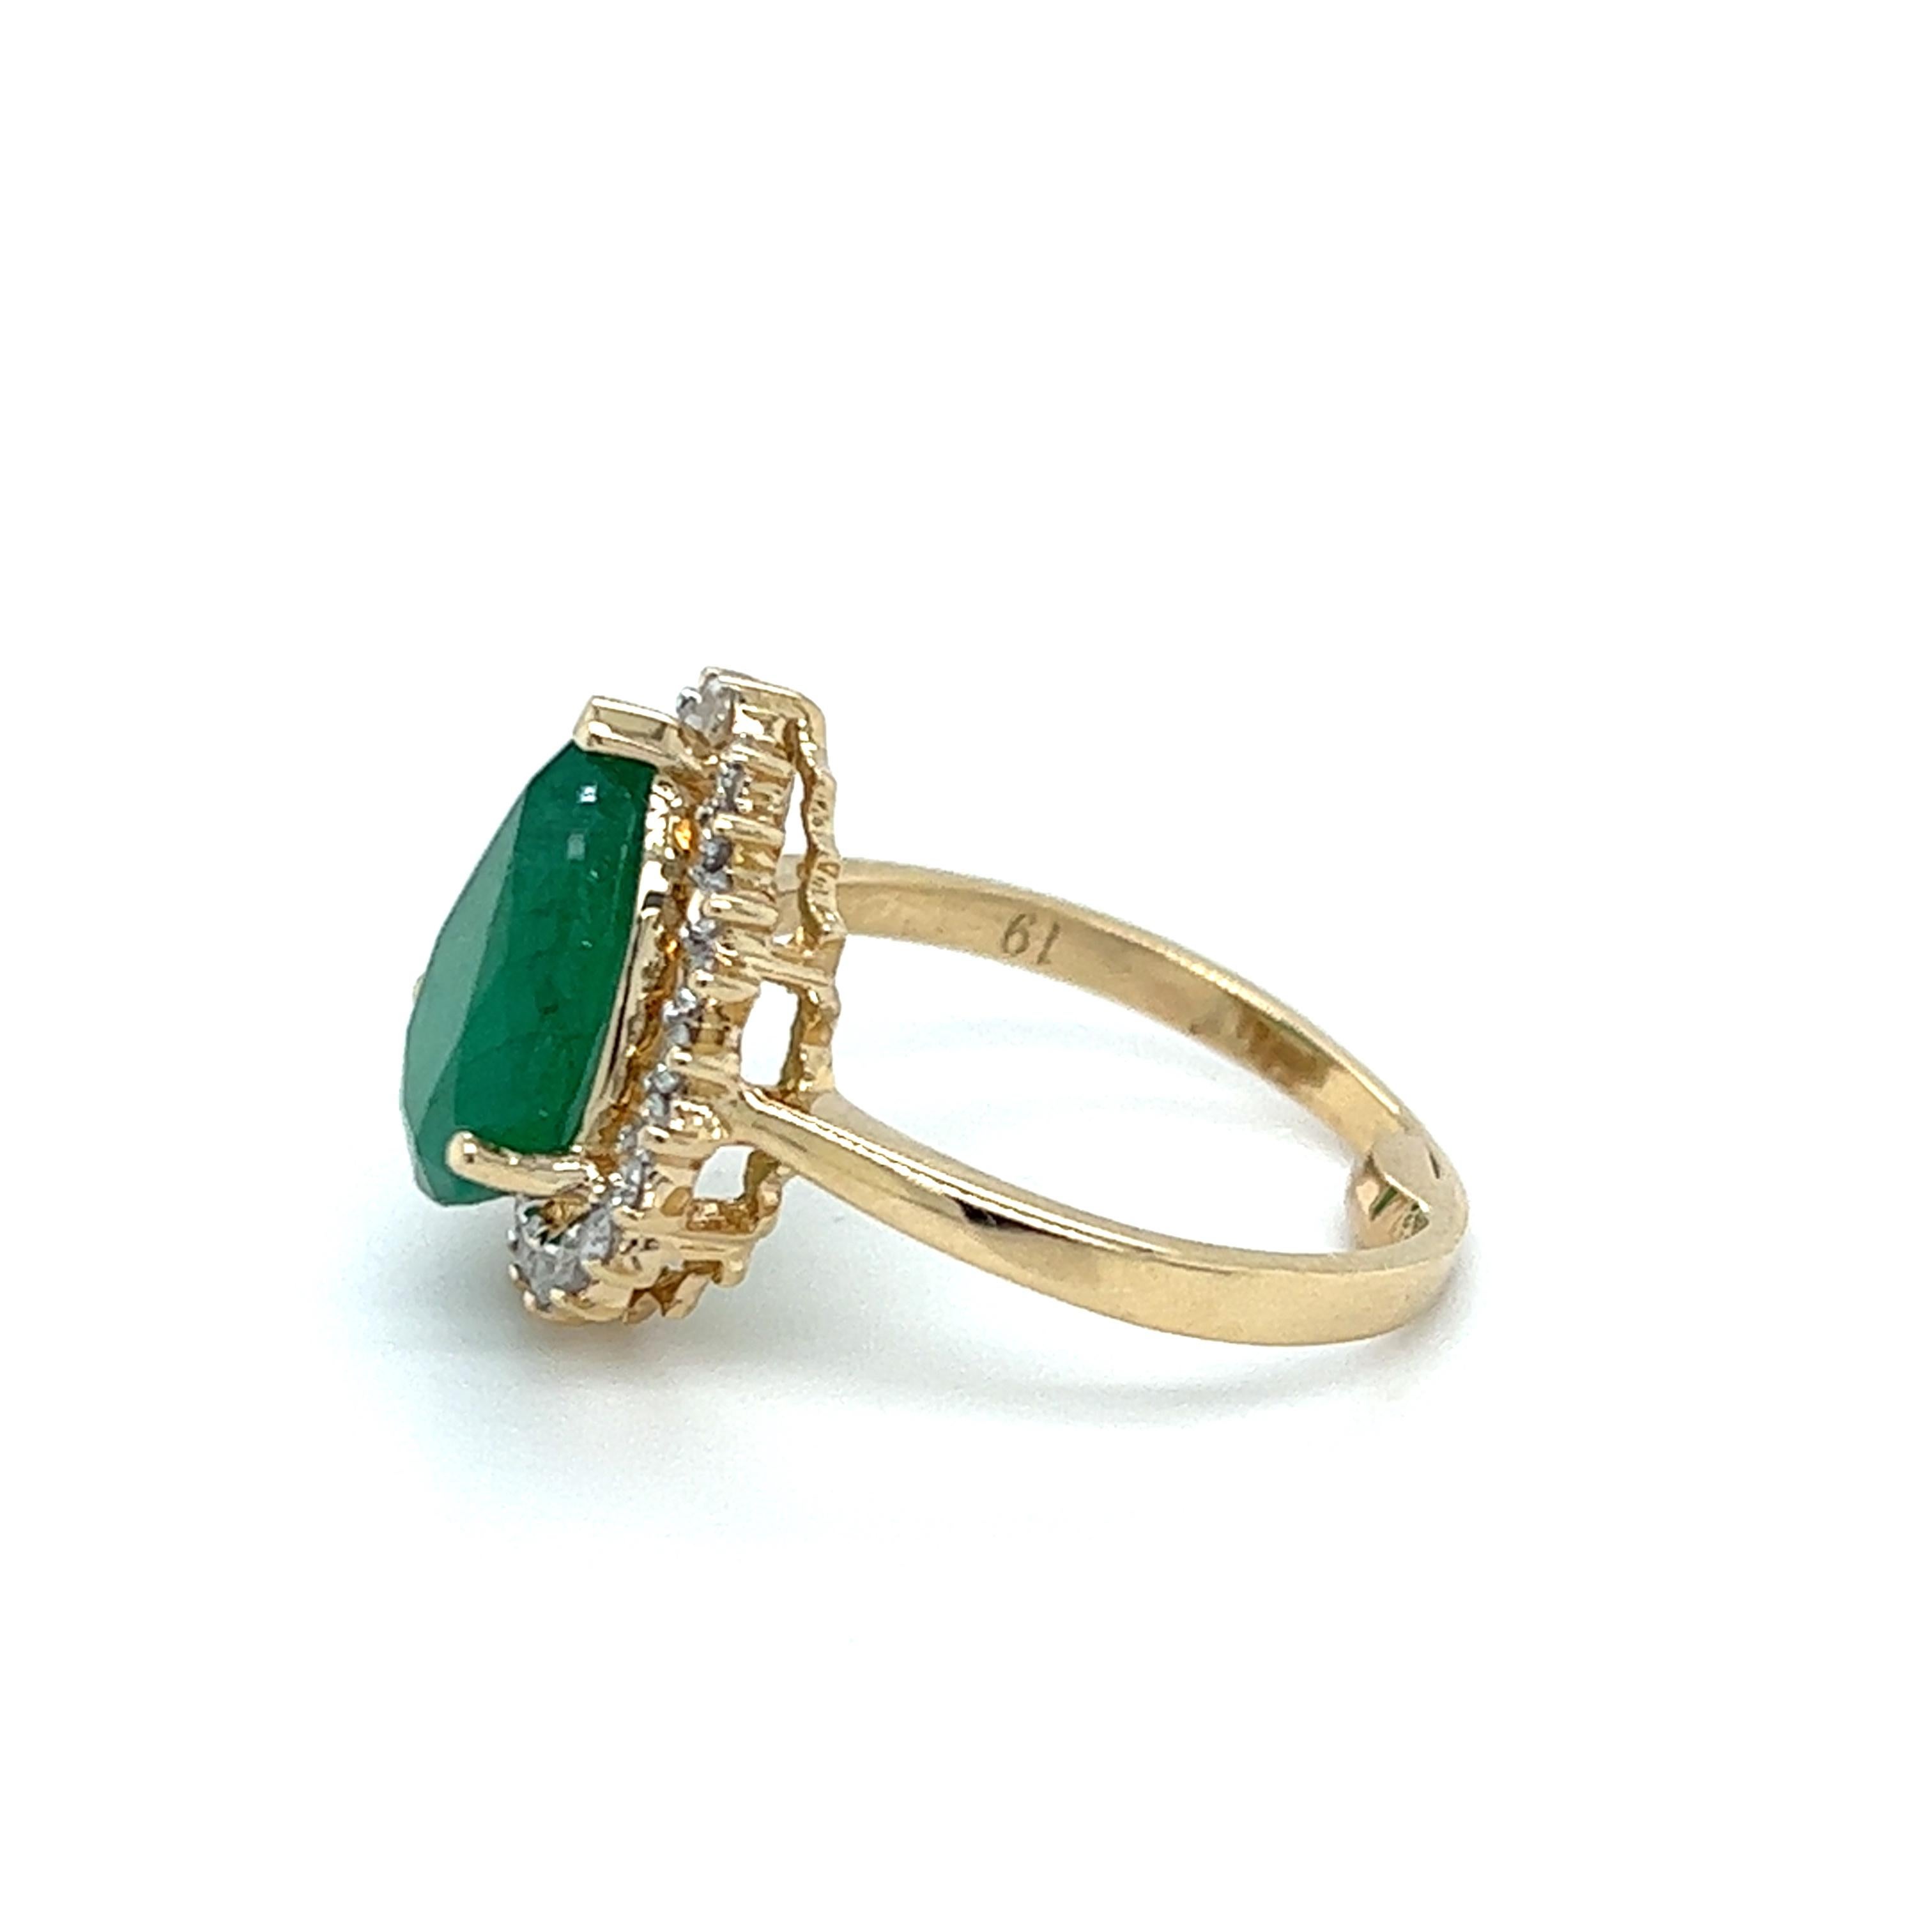 Pear Cut Contemporary Pear Shaped Emerald Diamond Halo Ring in 14K Yellow Gold